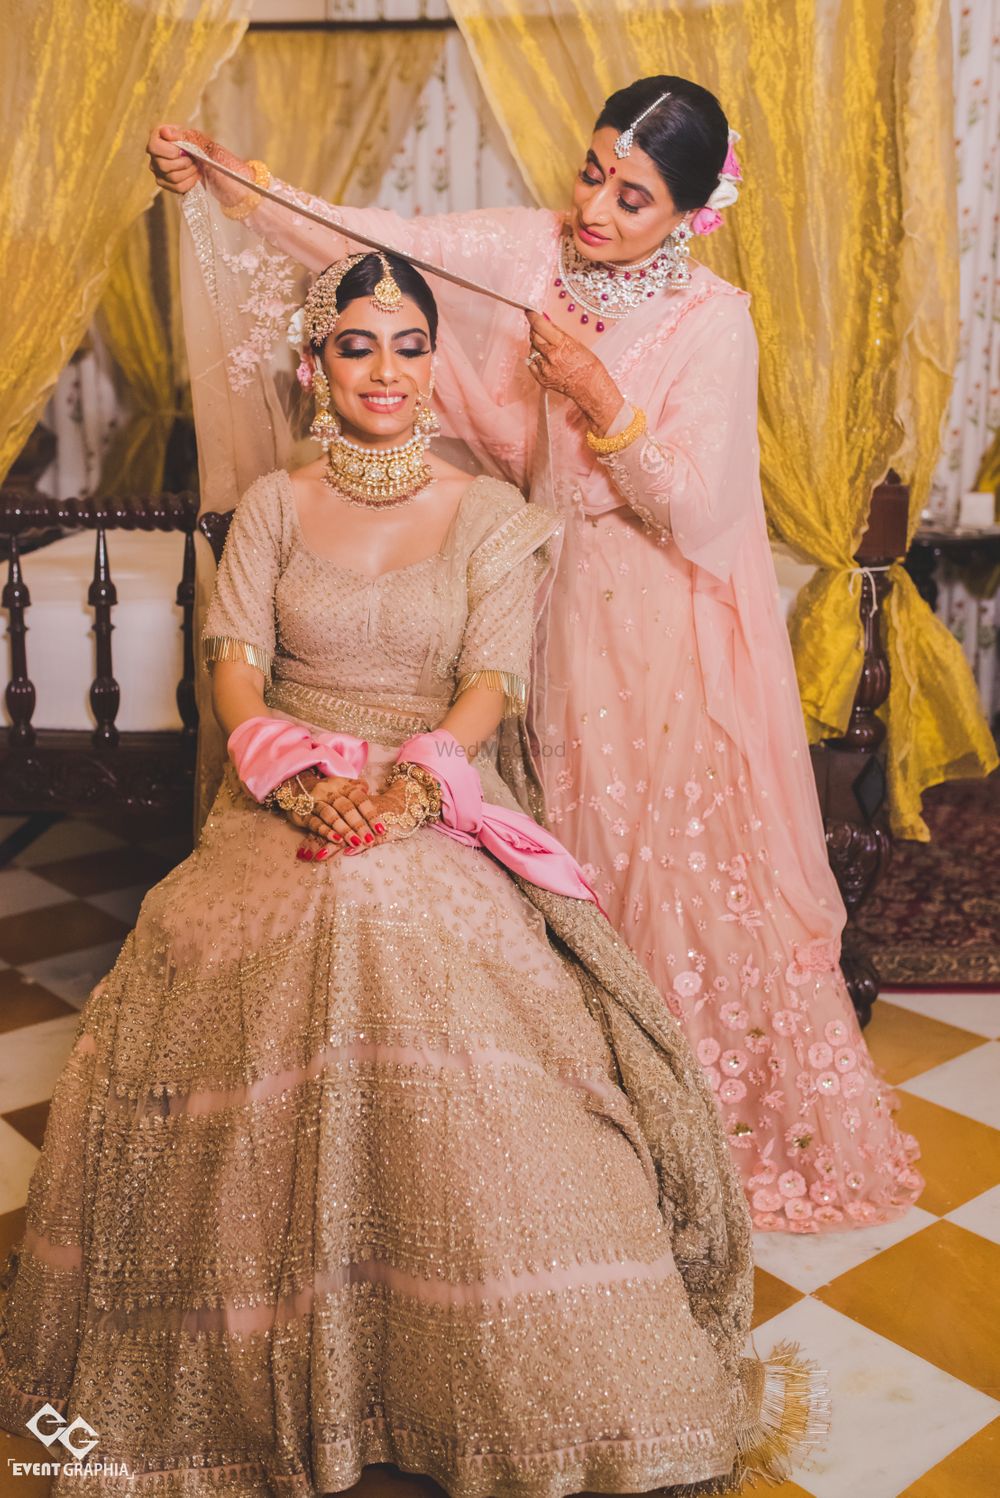 Photo of Bride with sister placing dupatta on her head